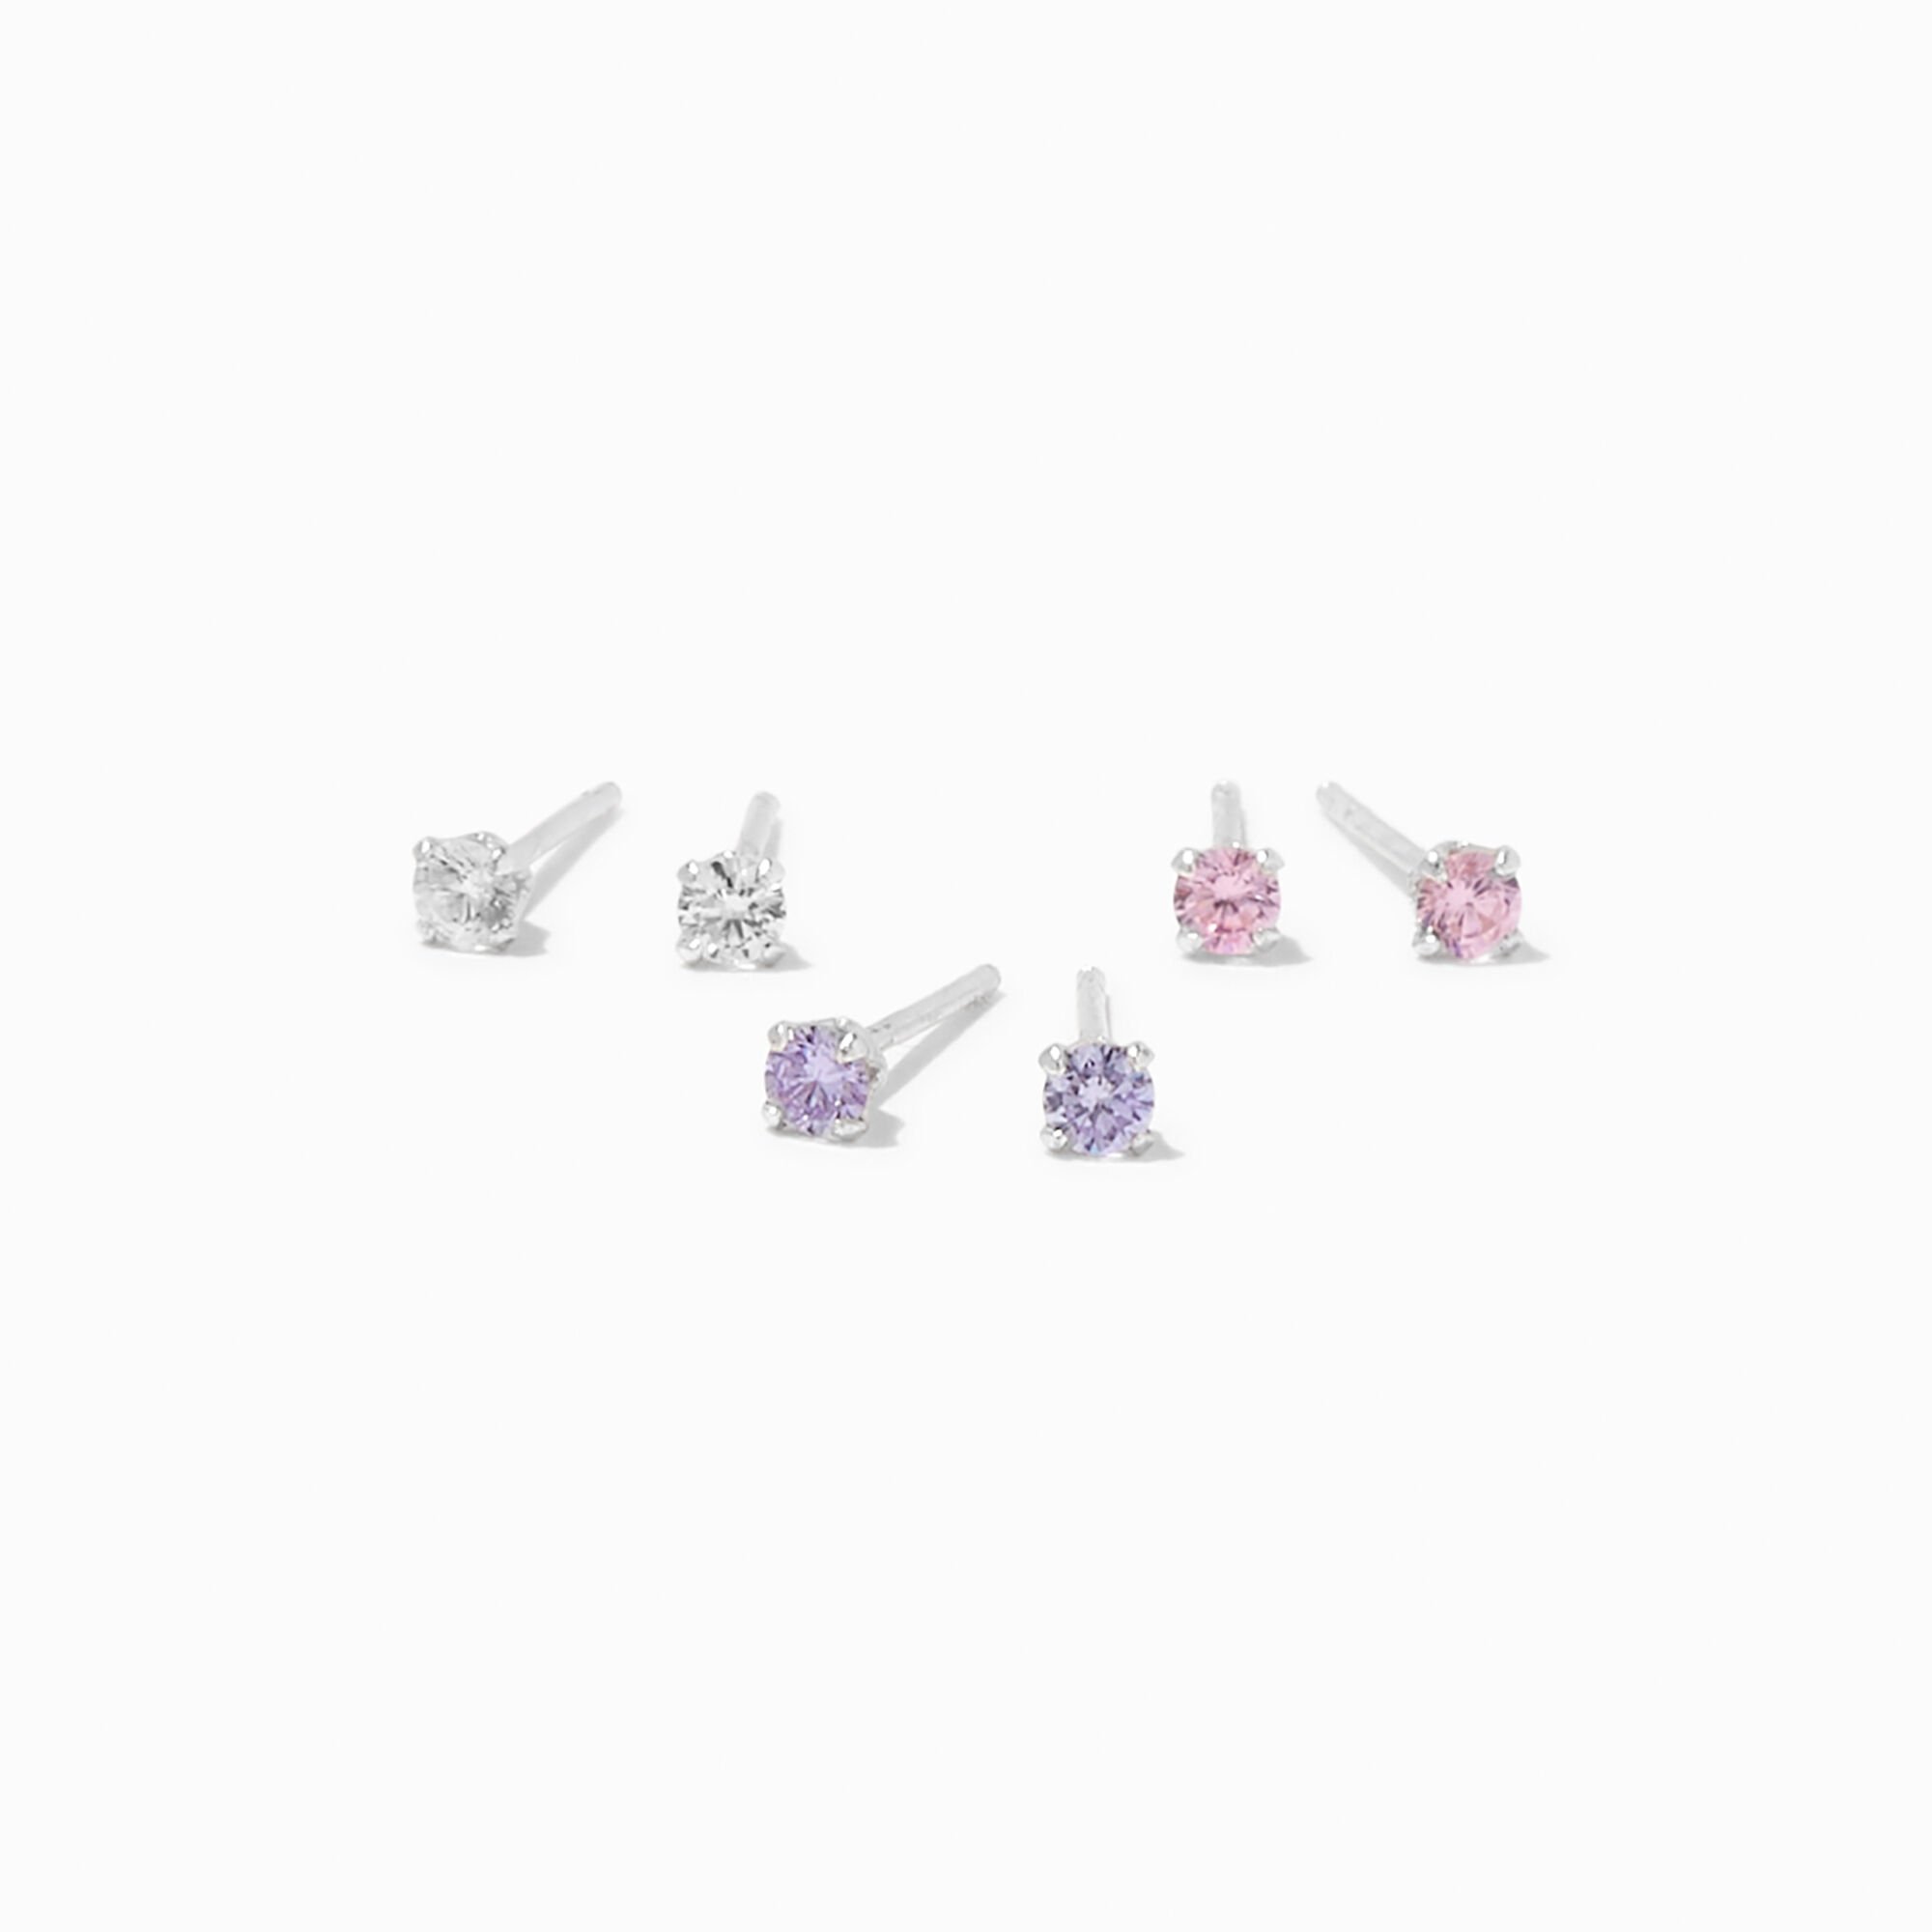 View C Luxe By Claires Cubic Zirconia Round Stud Earrings 3 Pack Silver information